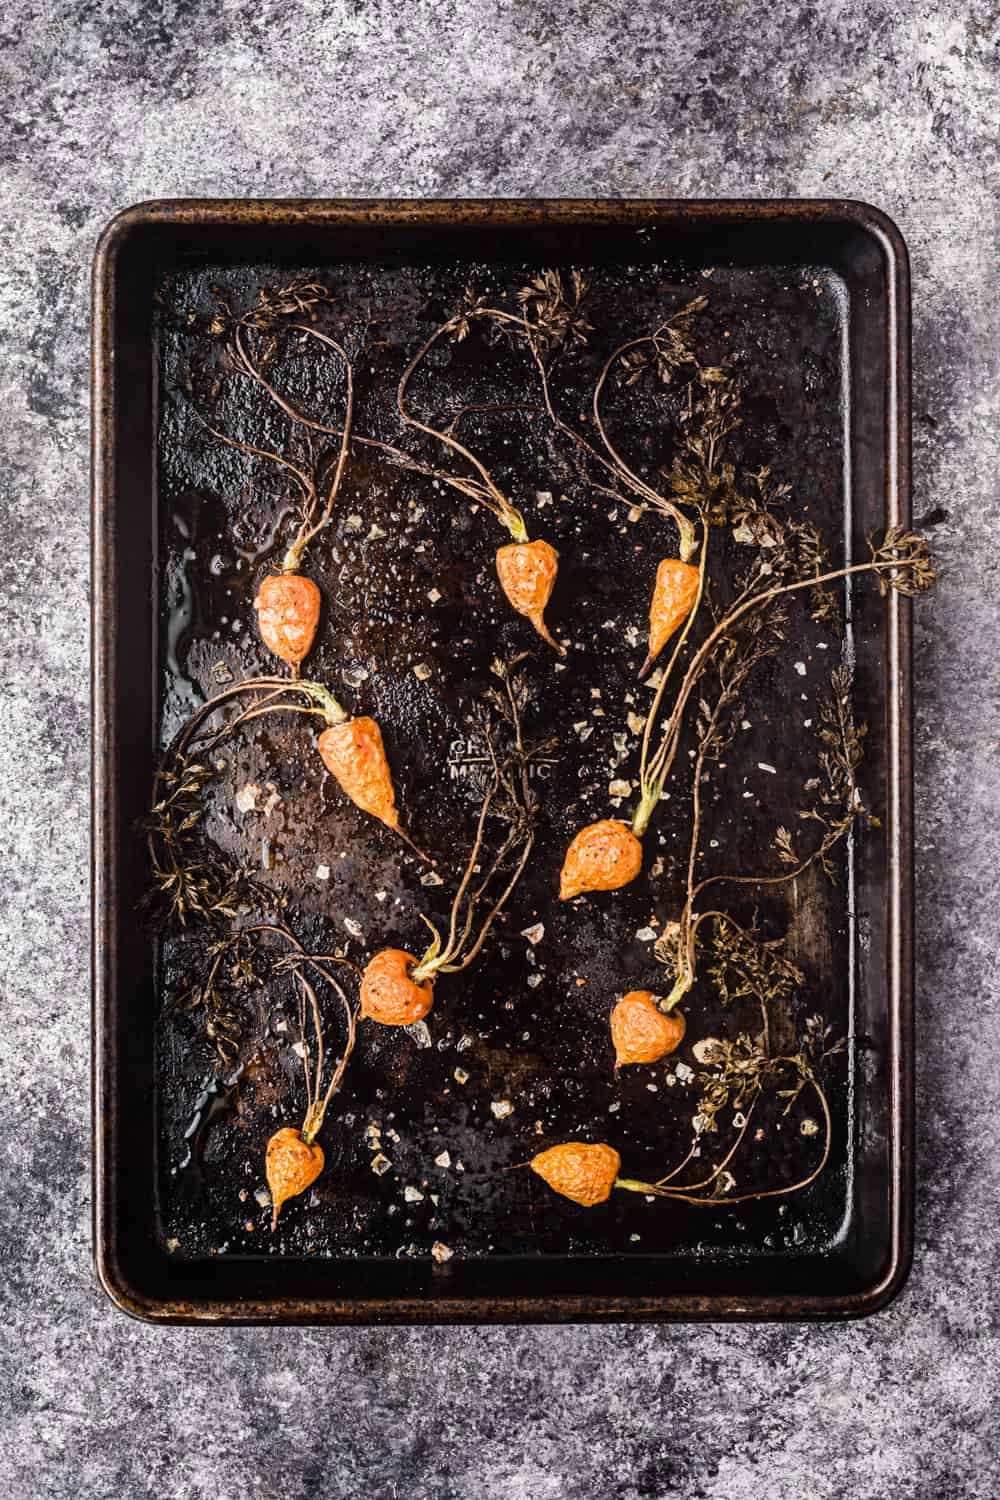 baking tray with roasted baby carrots, flaky sea salt and pepper to be used in the farmers market salad